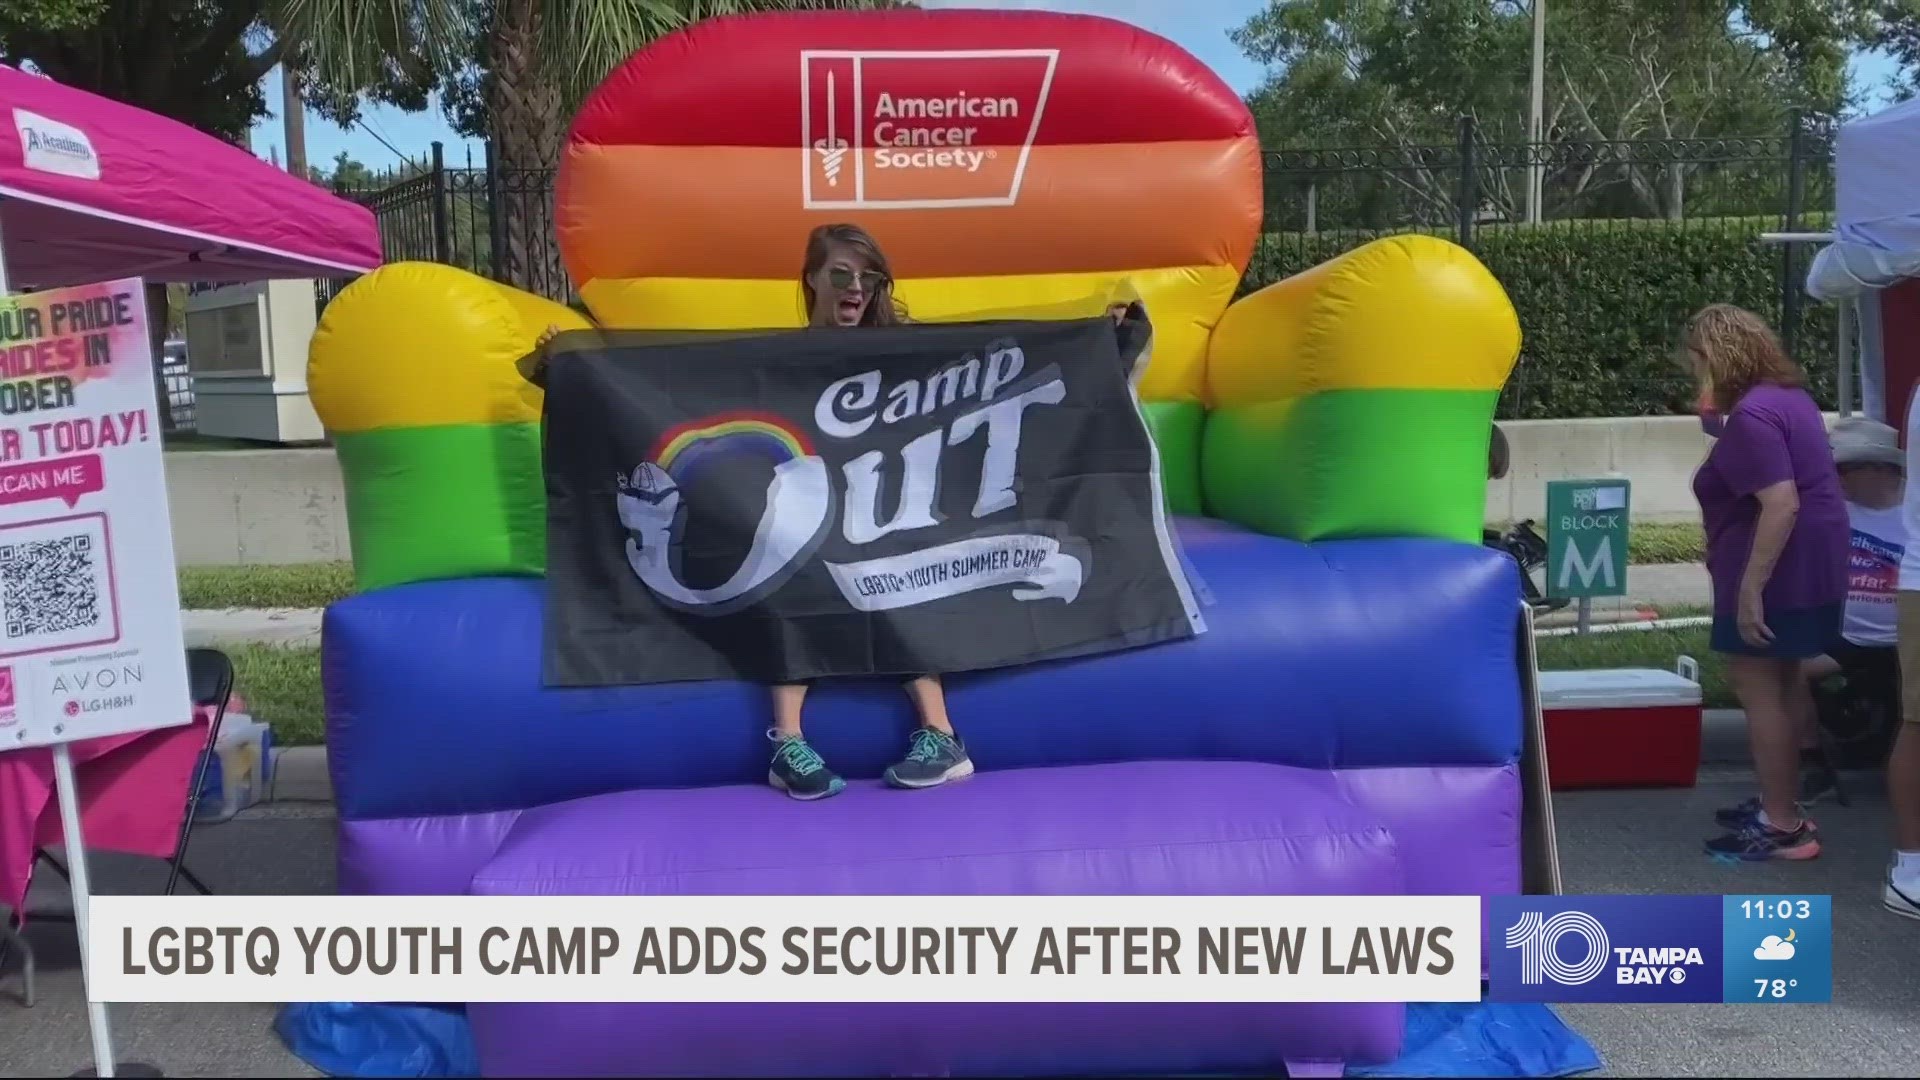 The founder of camp "Camp Out" added additional safety protocols and security.